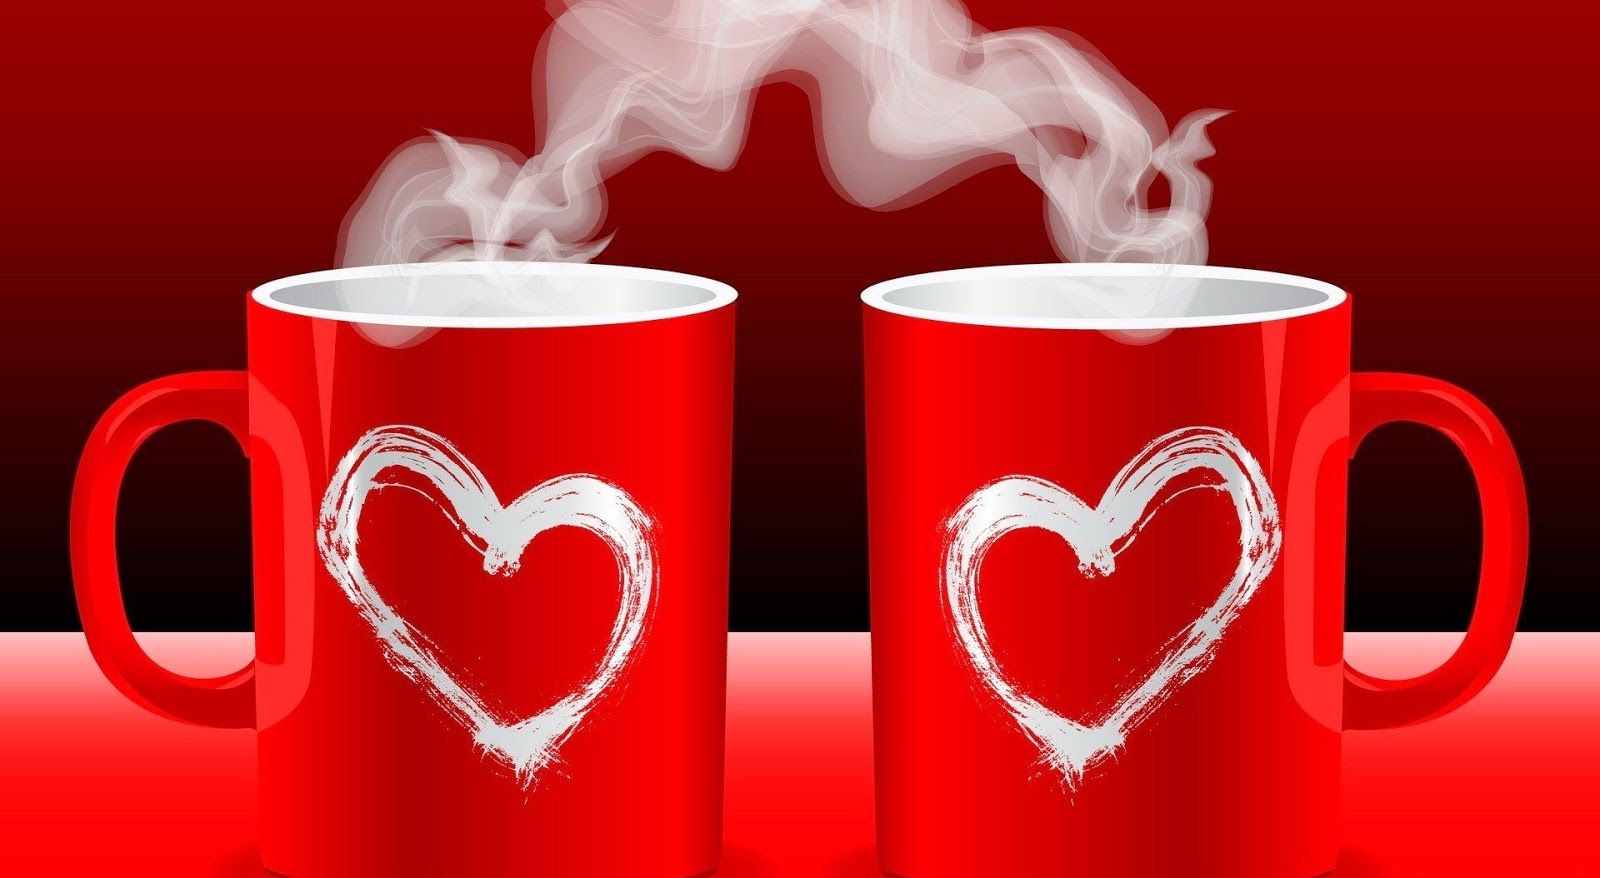 good morning wallpaper,mug,coffee cup,heart,red,cup